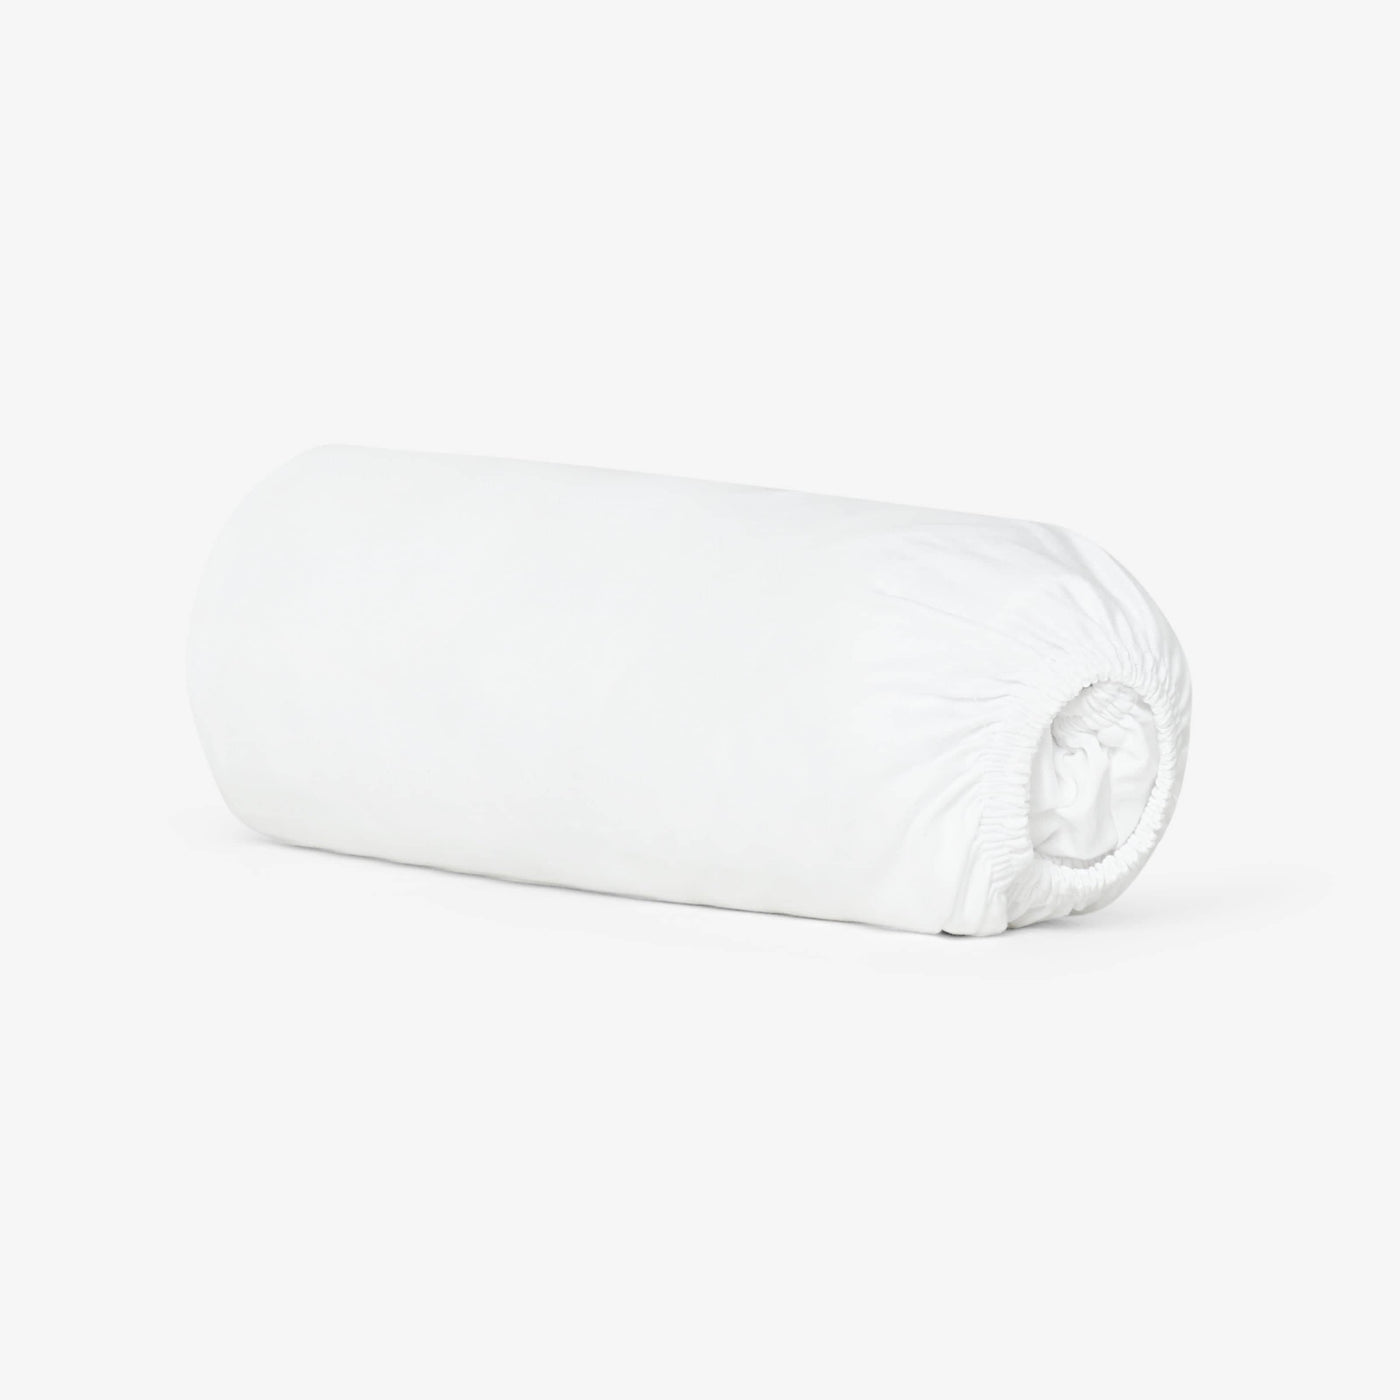 Darcy 100% Turkish Cotton 210 TC Fitted Sheet, White, Super King Size Bed Sheets sazy.com